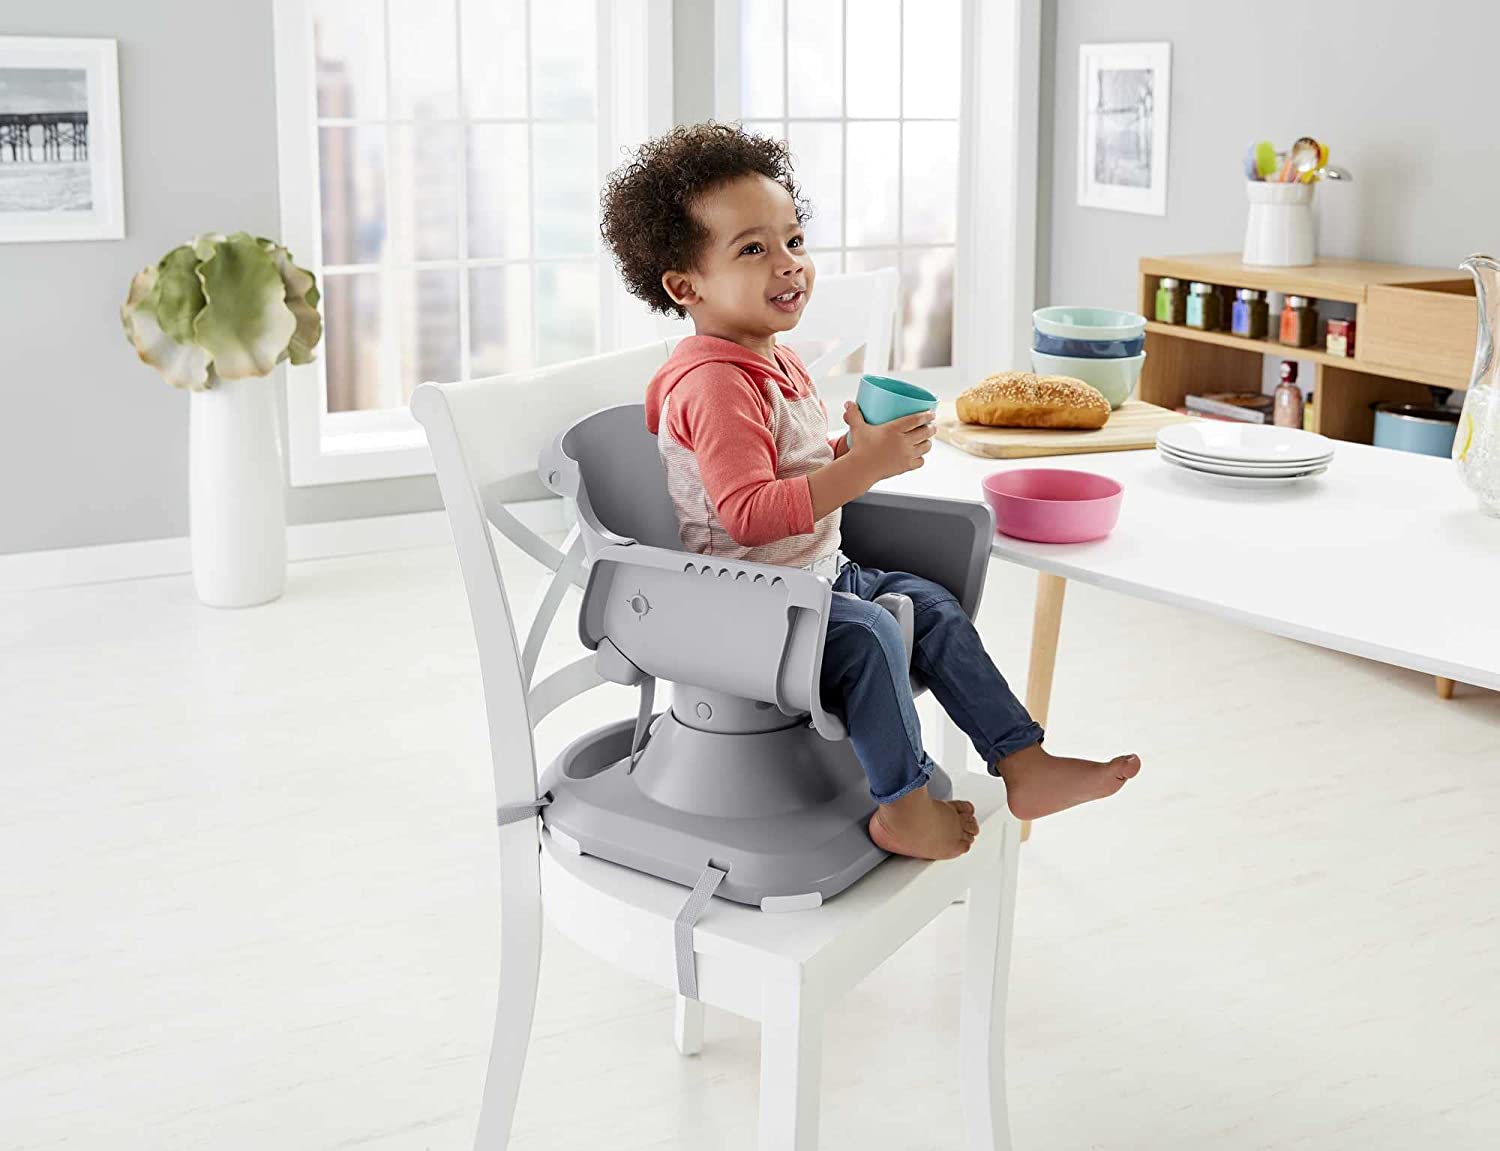 Fisher-Price SpaceSaver High Chair, Slanted Sails - with 2 height adjustments & 3 recline positions